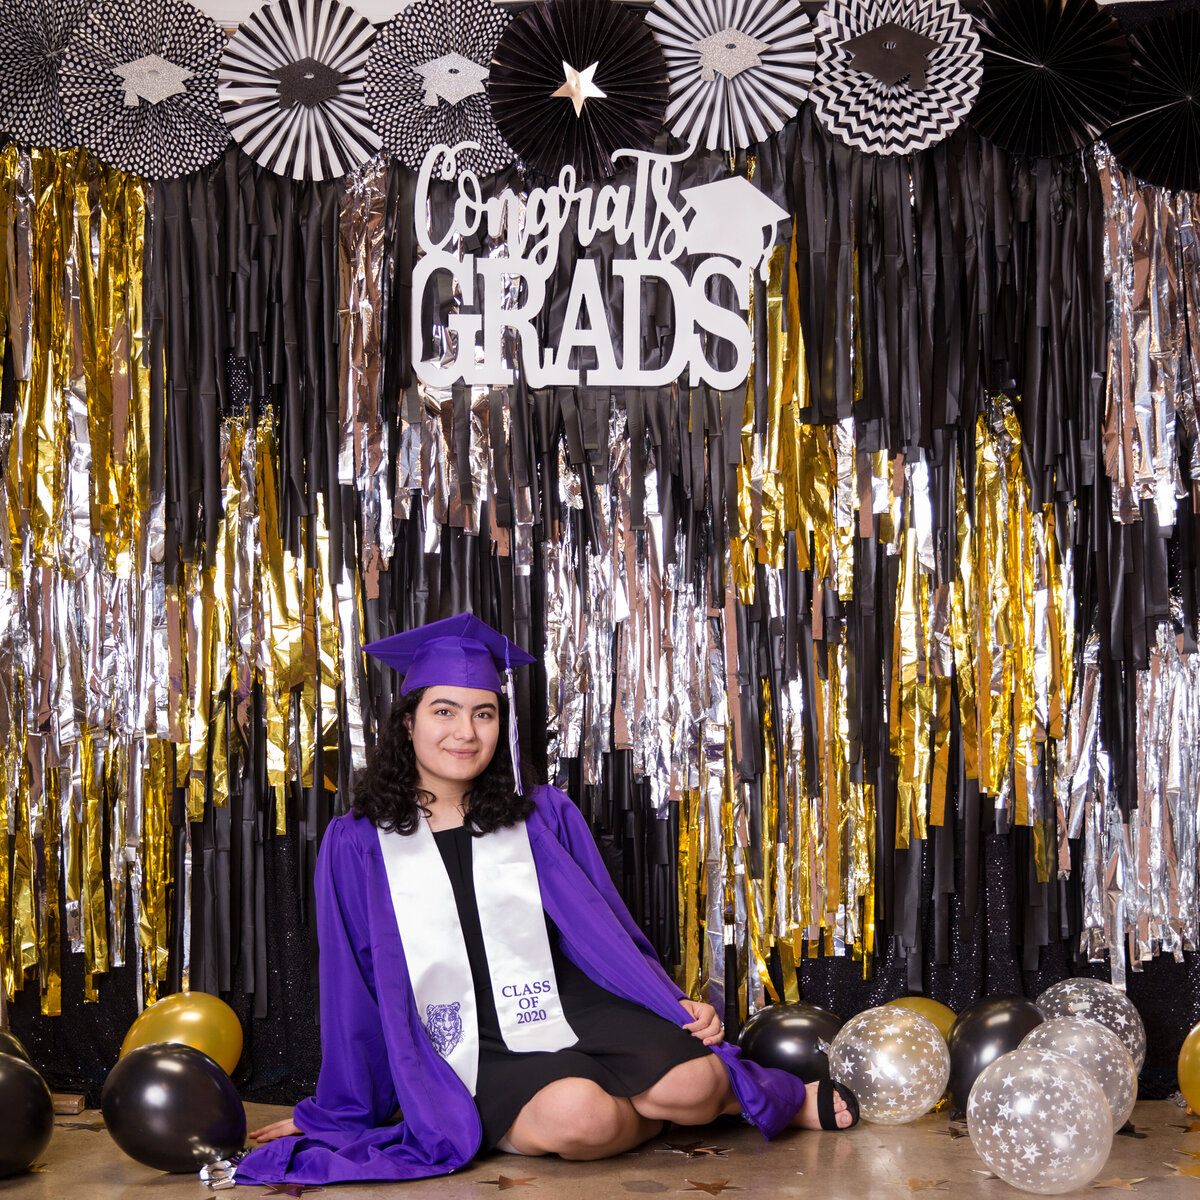 Girl in purple cap and gown posing in front of a black, gold and silver colored graduation backdrop display decorated with streamers